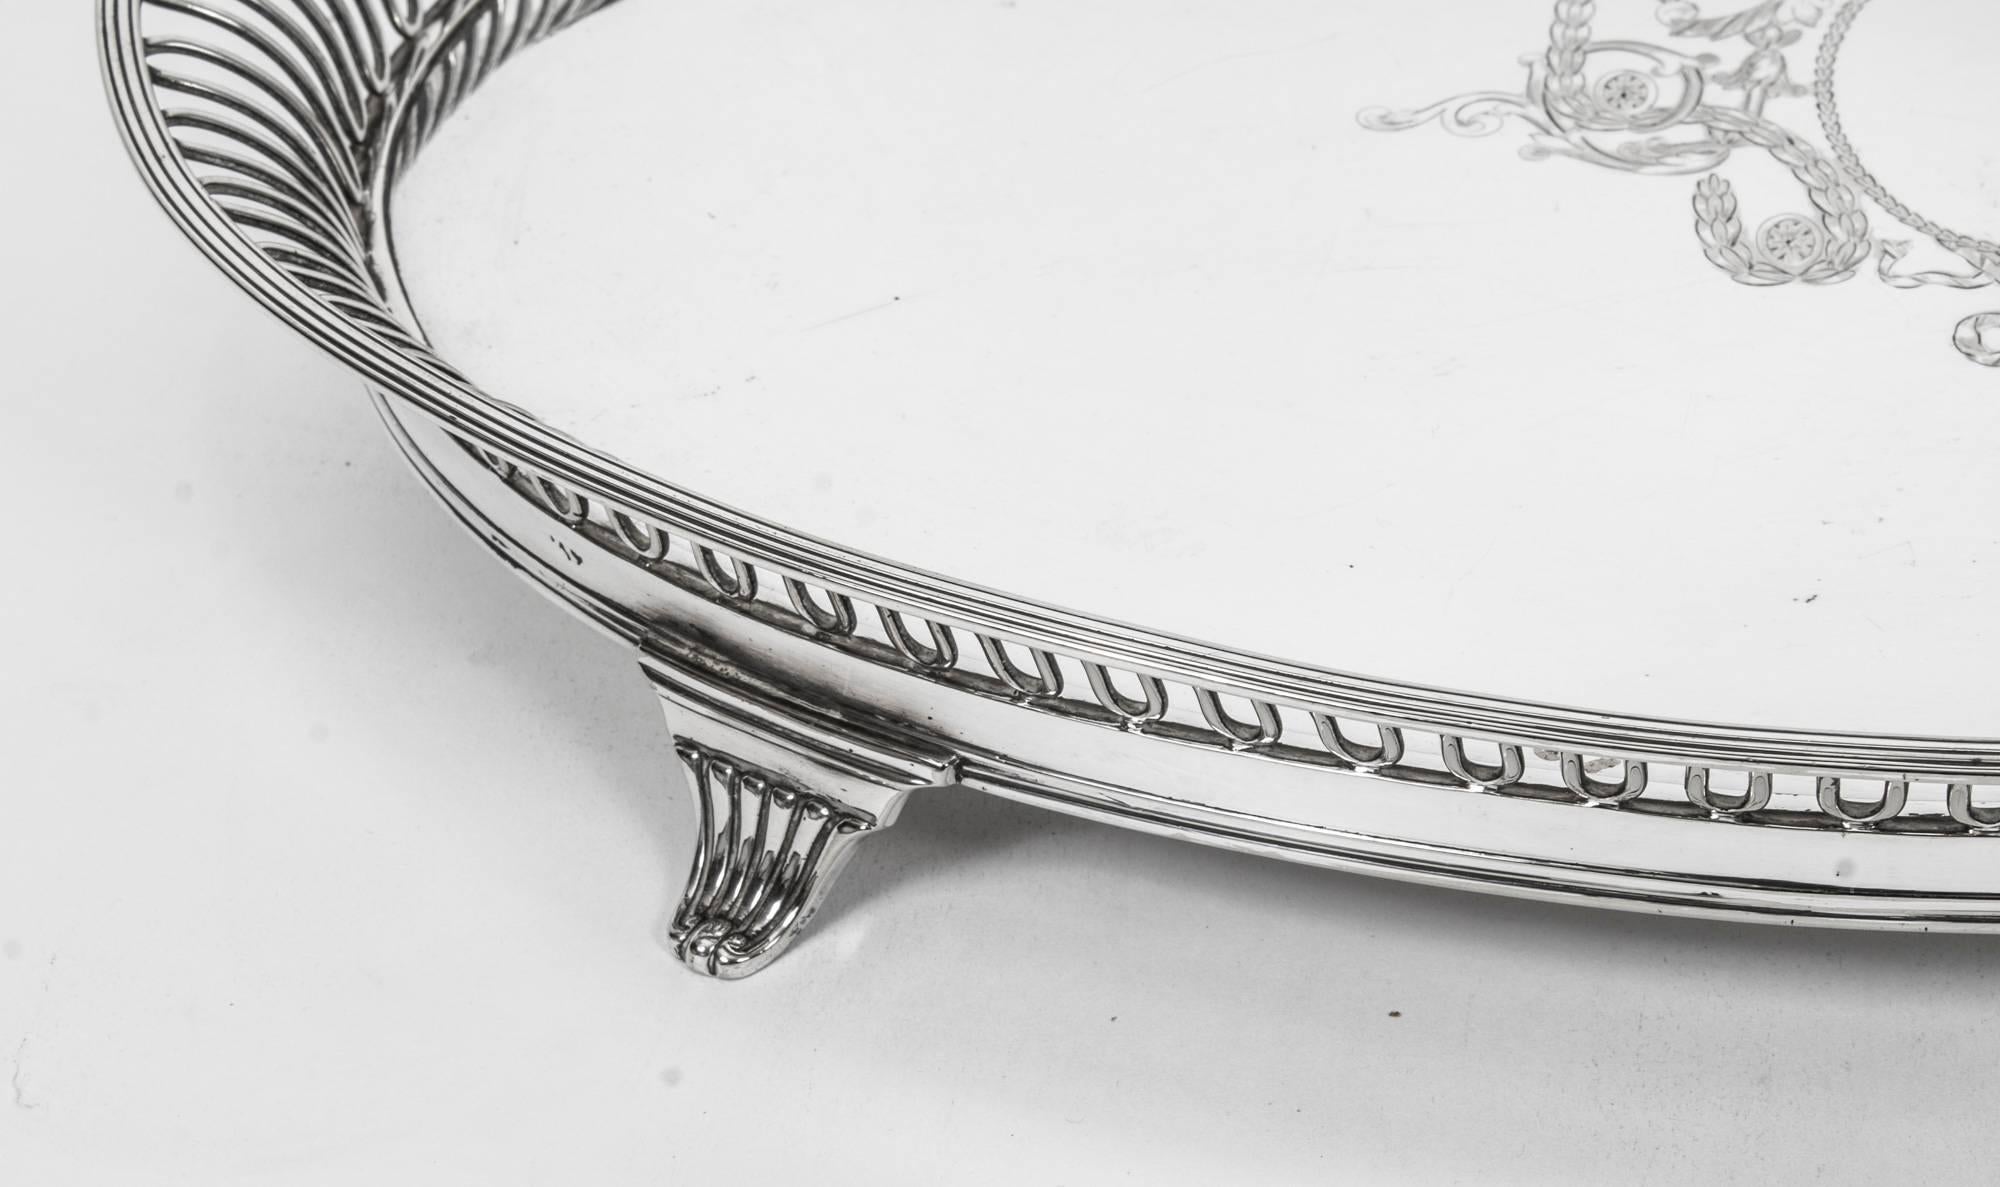 This is an exceptional antique English Victorian silver plated oval tray with a beautiful galleried border,

circa 1880 in date and bearing the makers marks of the renowned silversmiths Elkington & Co.
This magnificent tea tray is one of the